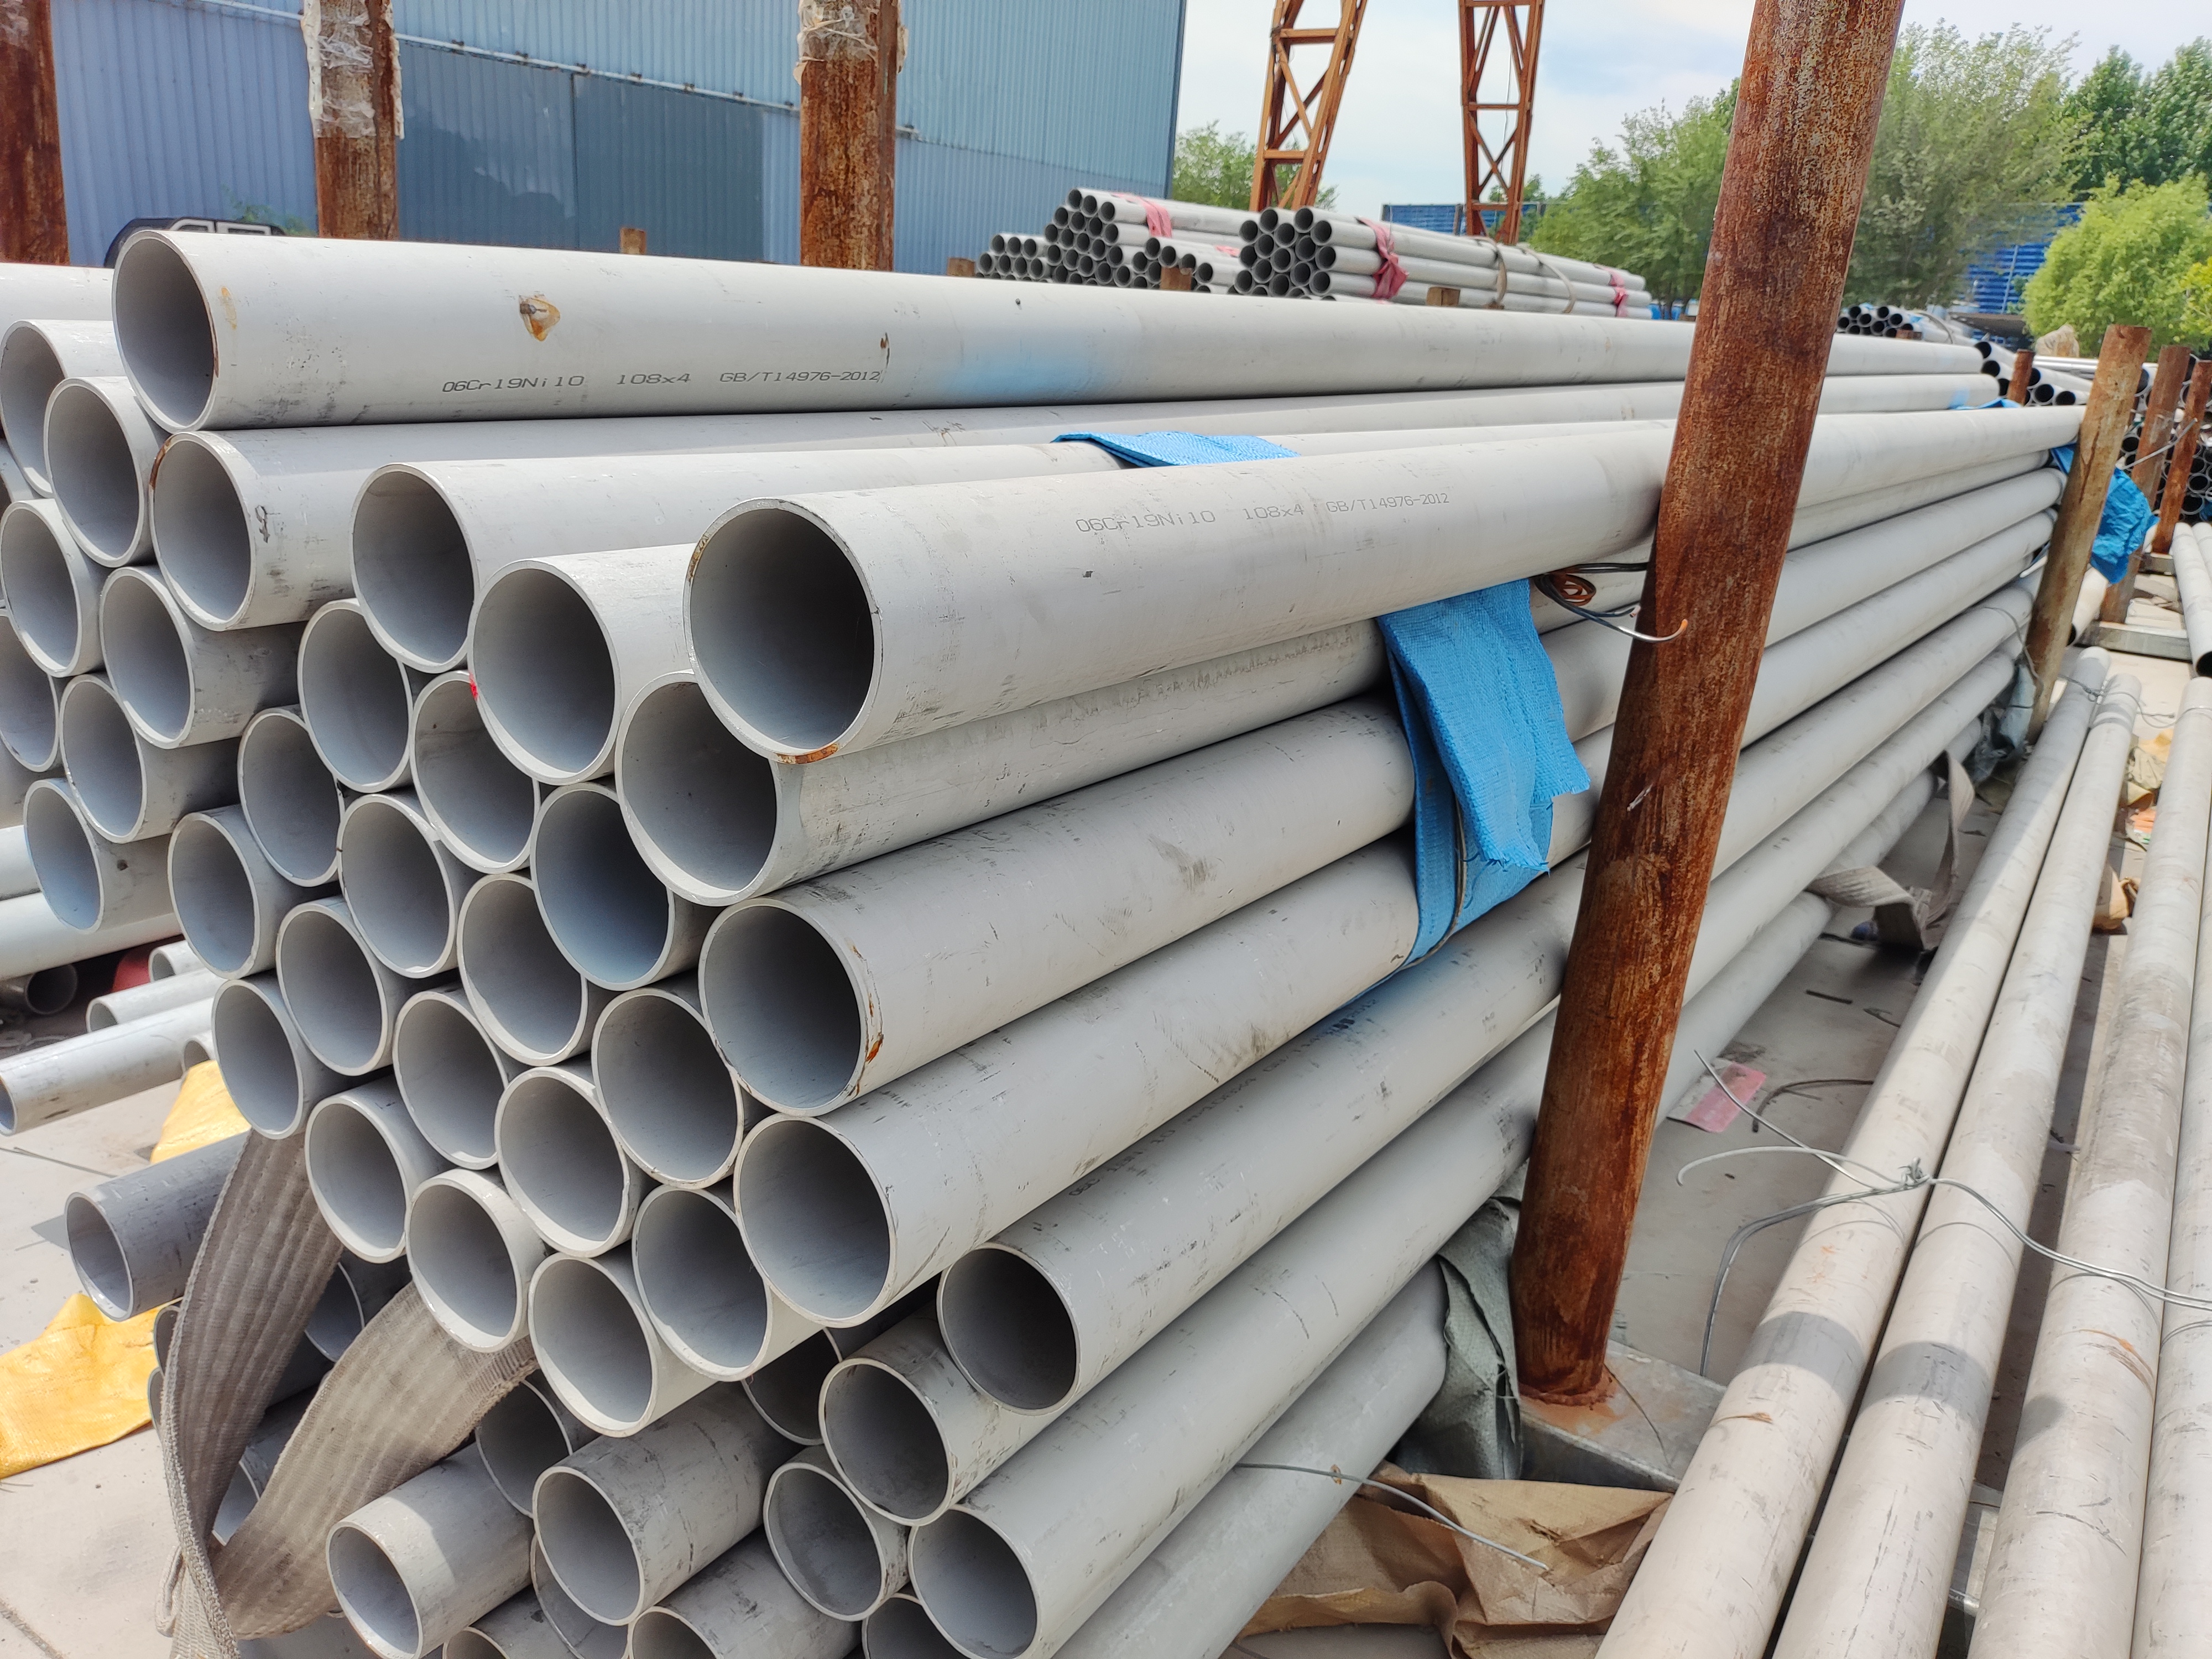 Stainless Steel Seamless Pipe Industrial Pipe 304 304L 316 316L Sanitary Seamless Tube Stainless Steel Pipe